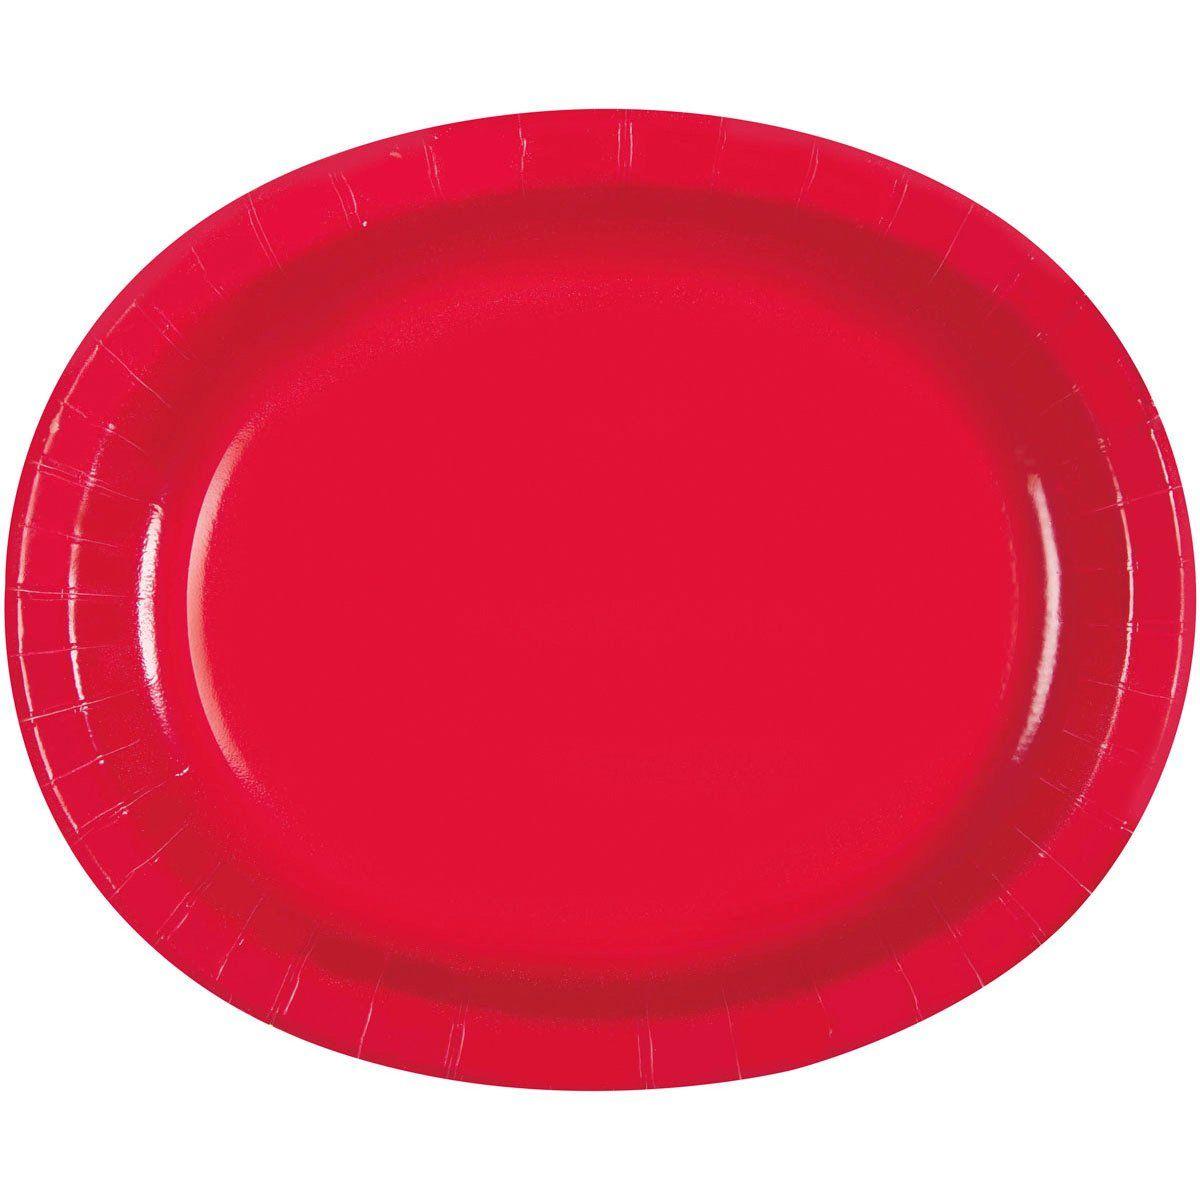 Food with Red Oval Logo - 12